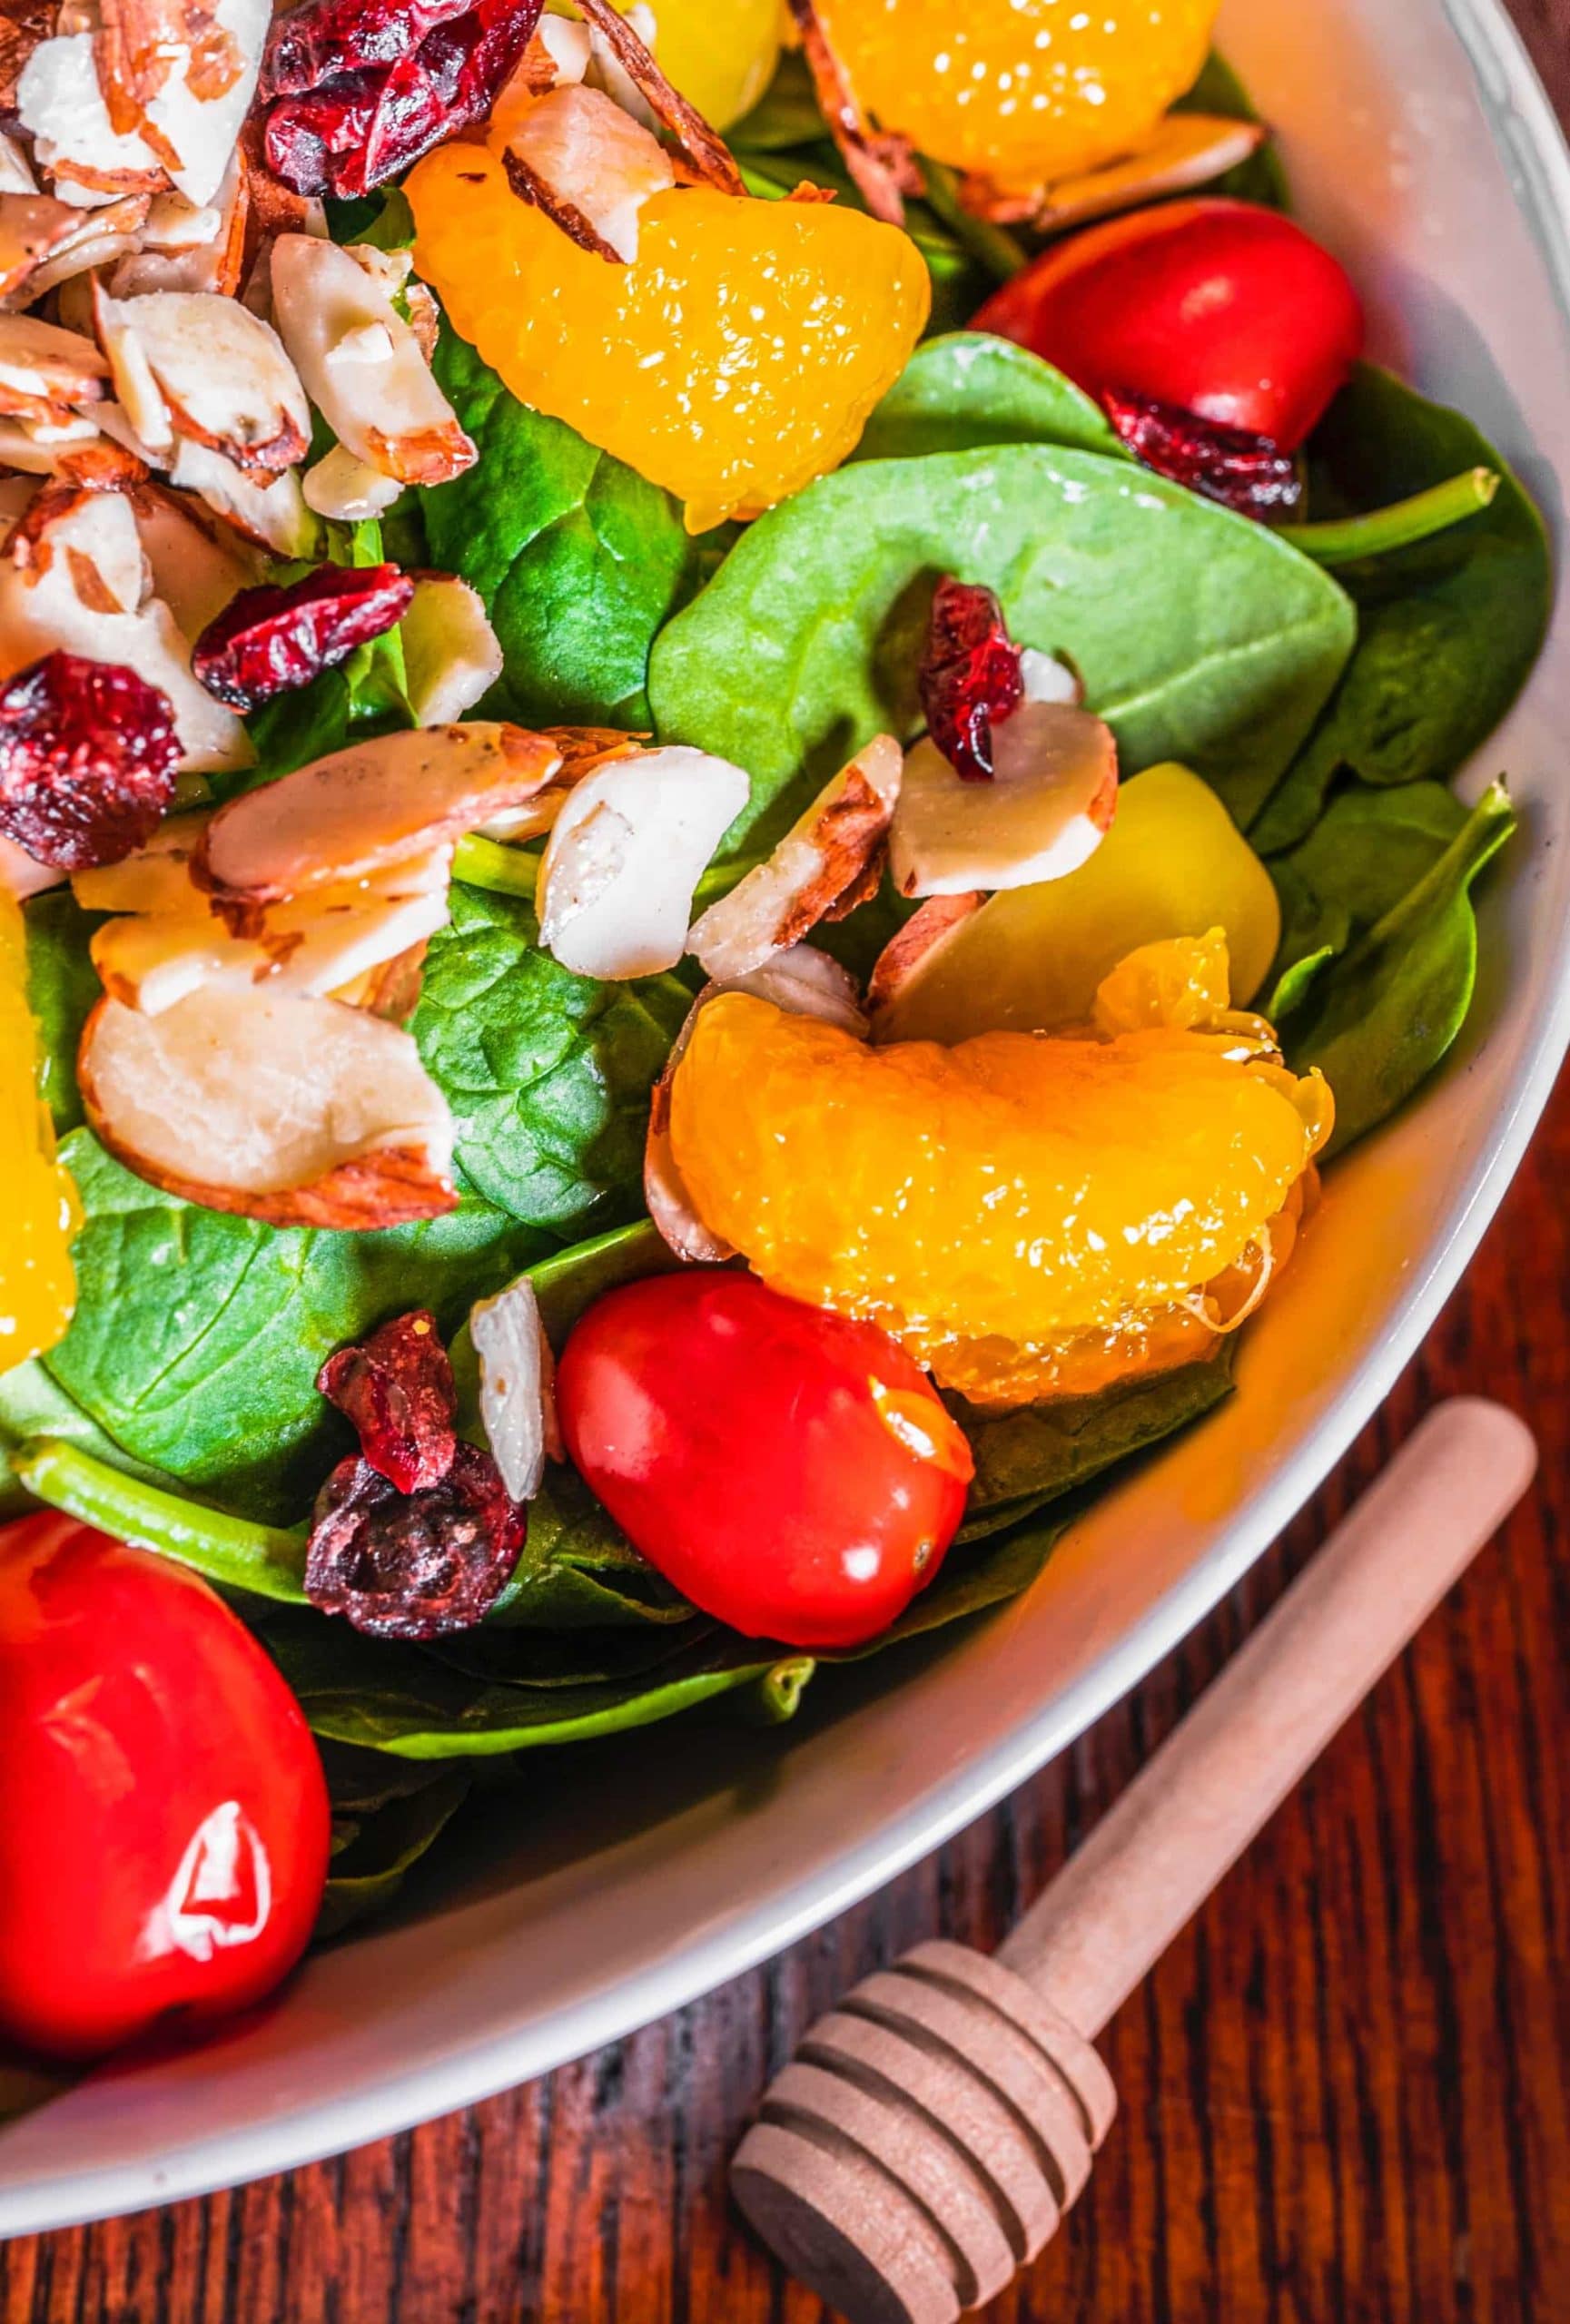 spinach salad with mandarins, dried cranberries, and other toppings